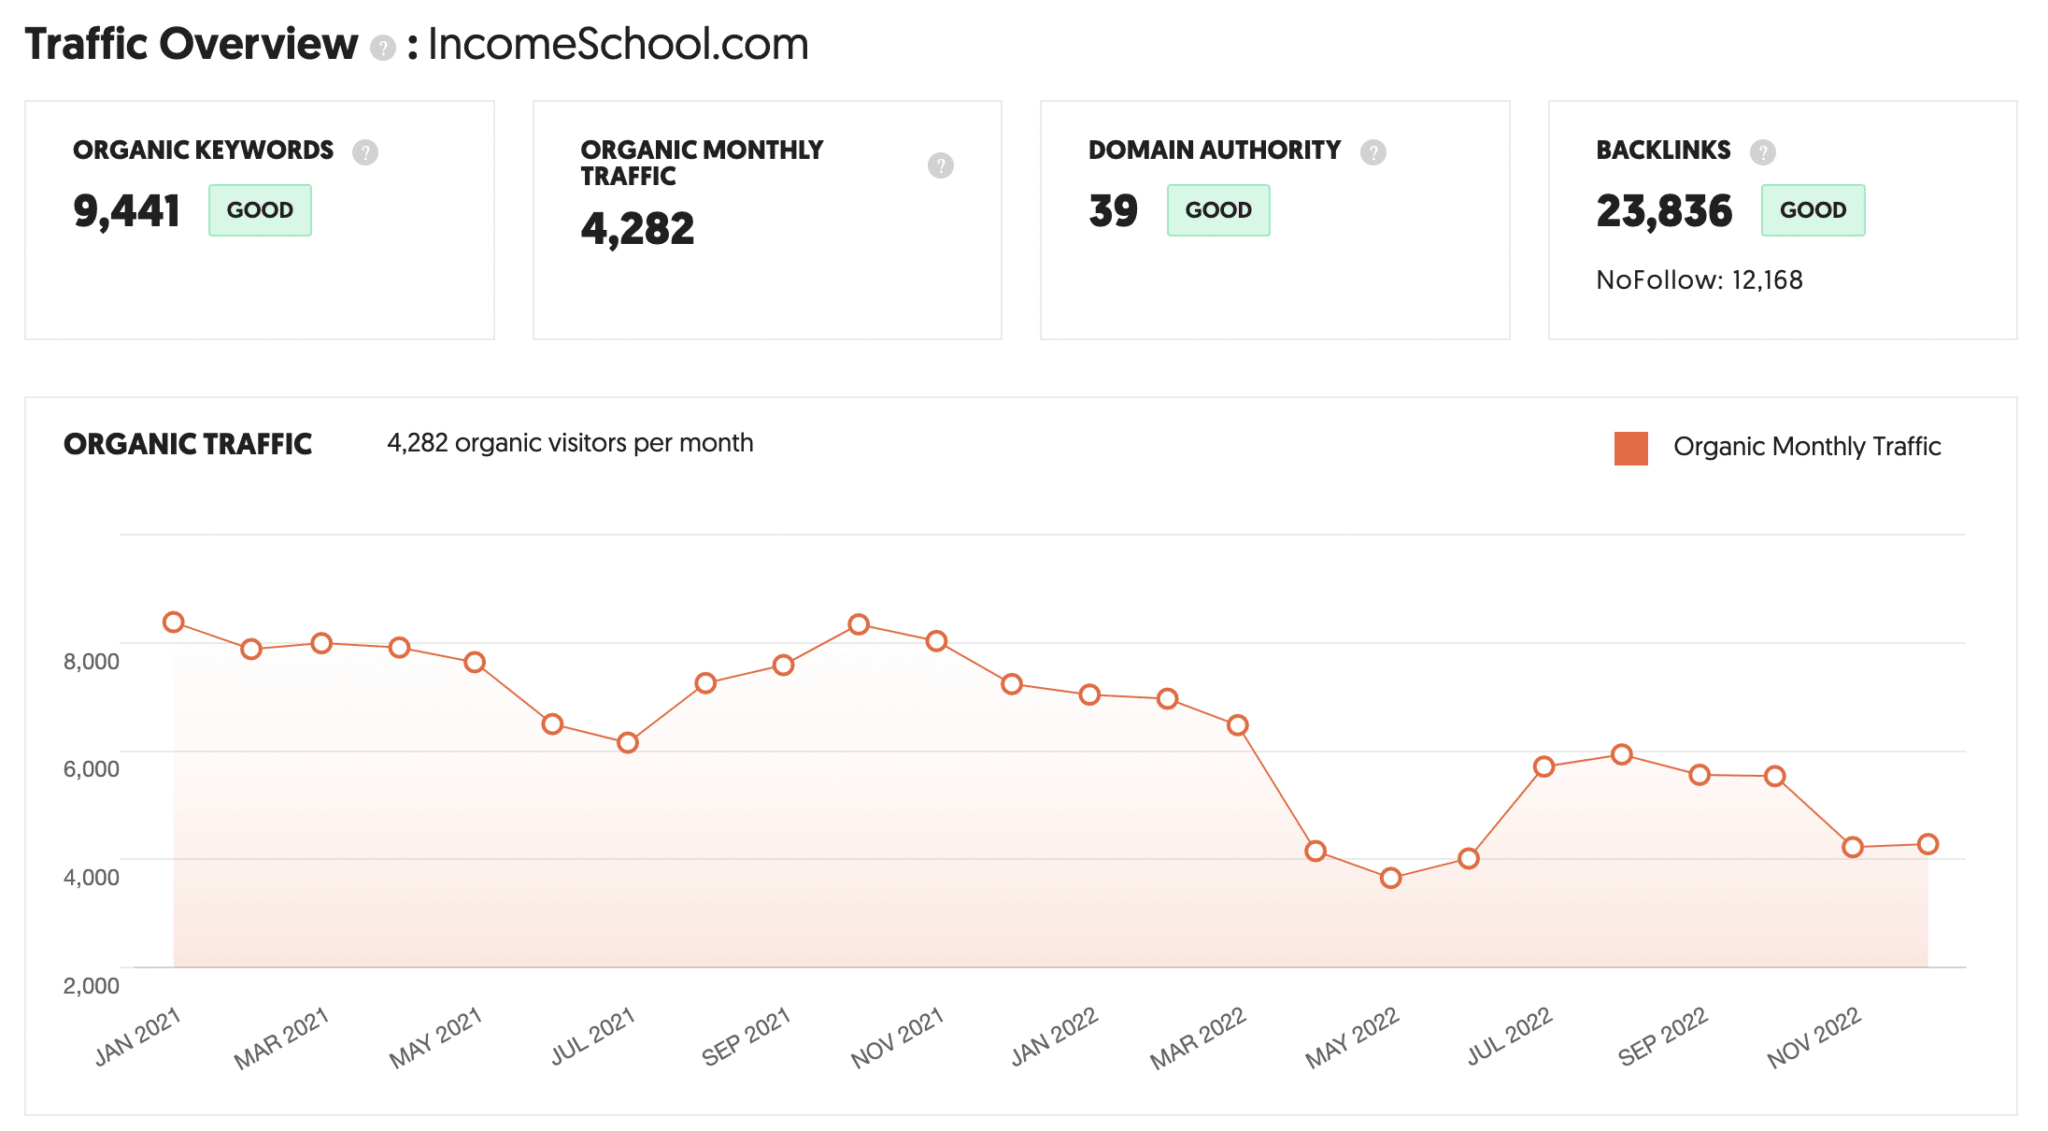 Income School monthly traffic